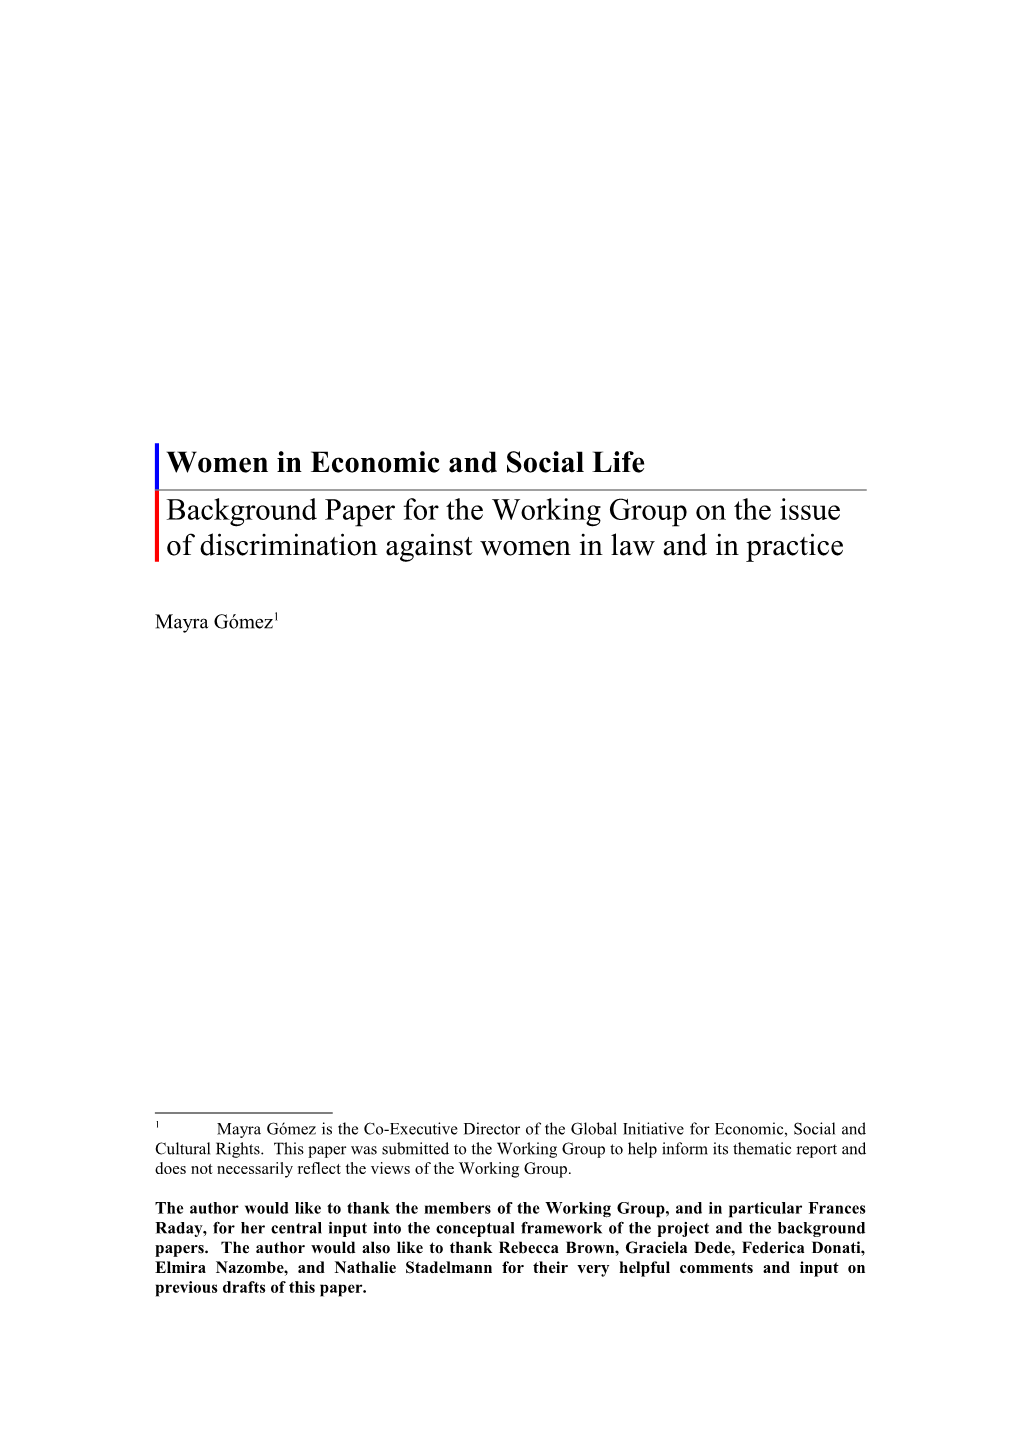 Preliminary Outline of Working Group Report on Eliminating Discrimination Against Women